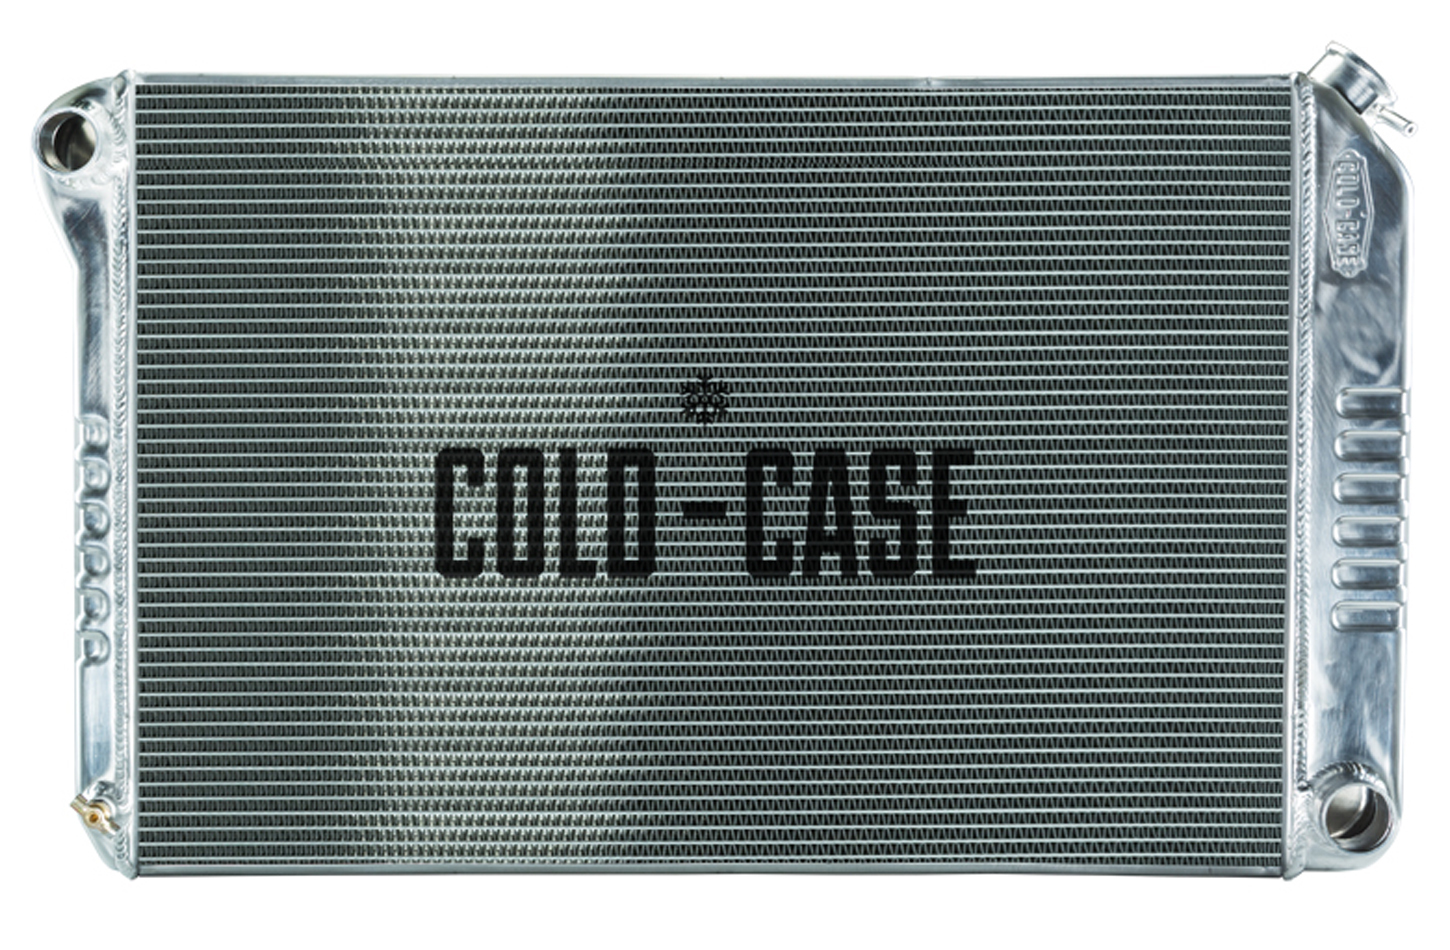 Cold Case Radiators CHC545 Radiator, 31.500 in W x 19 in H x 3 in D, Driver Side Inlet, Passenger Side Outlet, Aluminum, Polished, Manual, GM F-Body 1970-81, Each